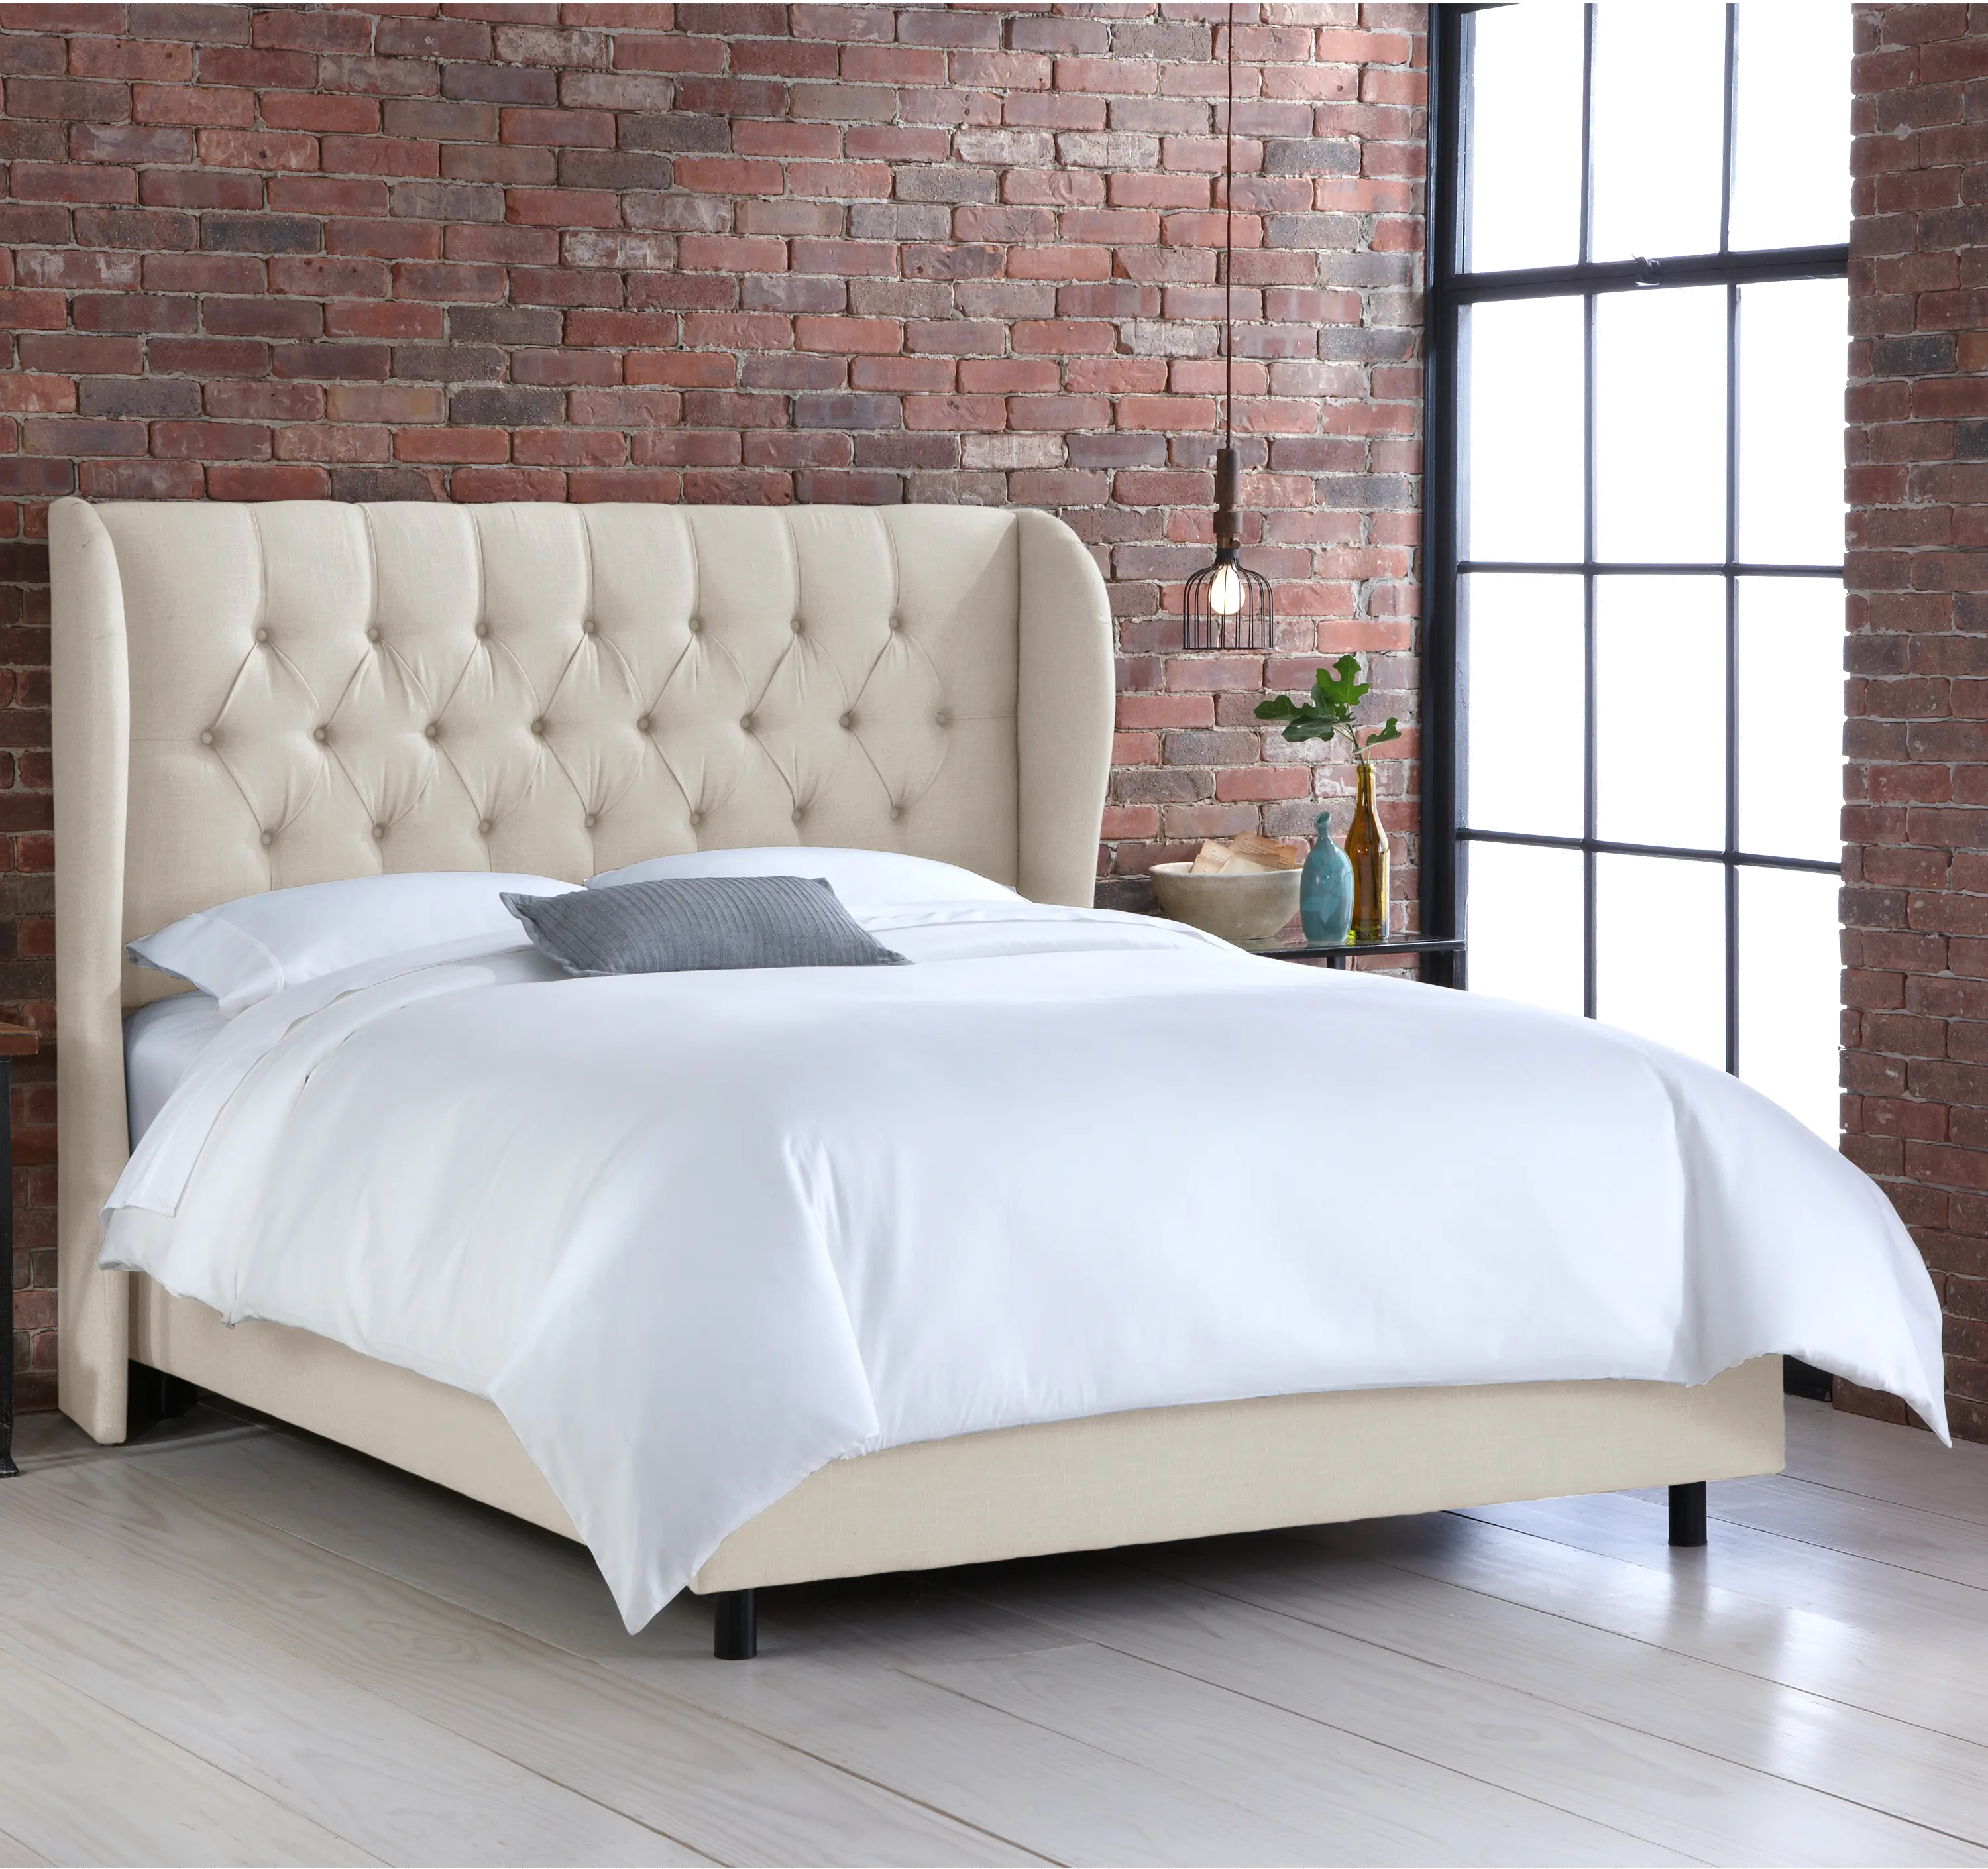 Izzy Cream Sloped Wingback Twin Bed - Skyline Furniture